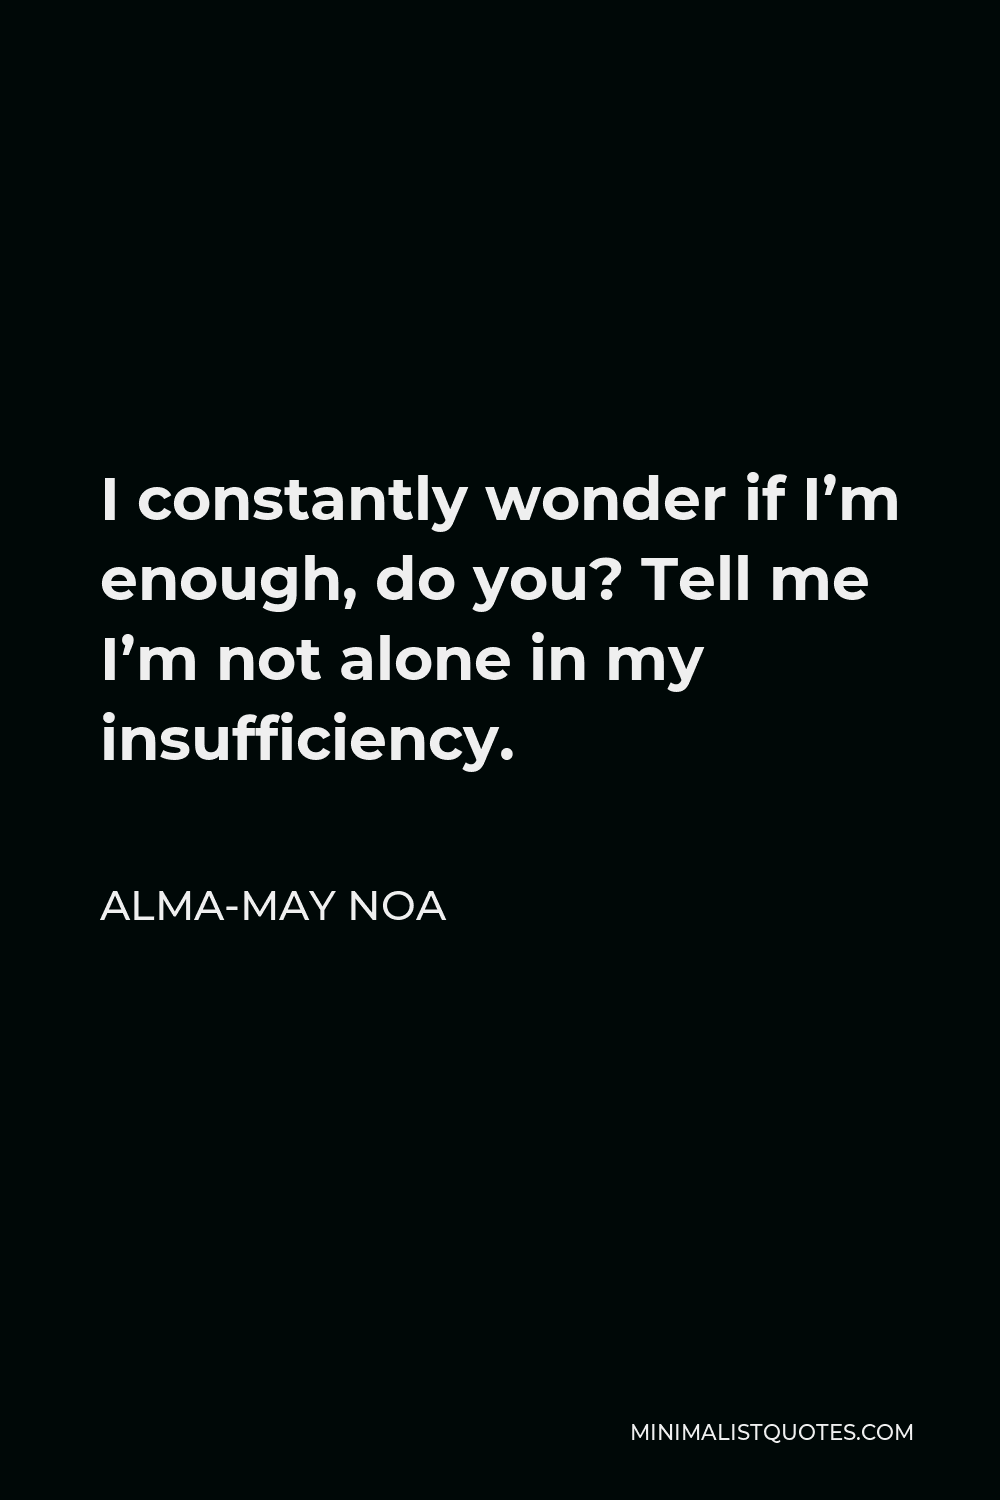 Alma-May Noa Quote - I constantly wonder if I’m enough, do you? Tell me I’m not alone in my insufficiency.